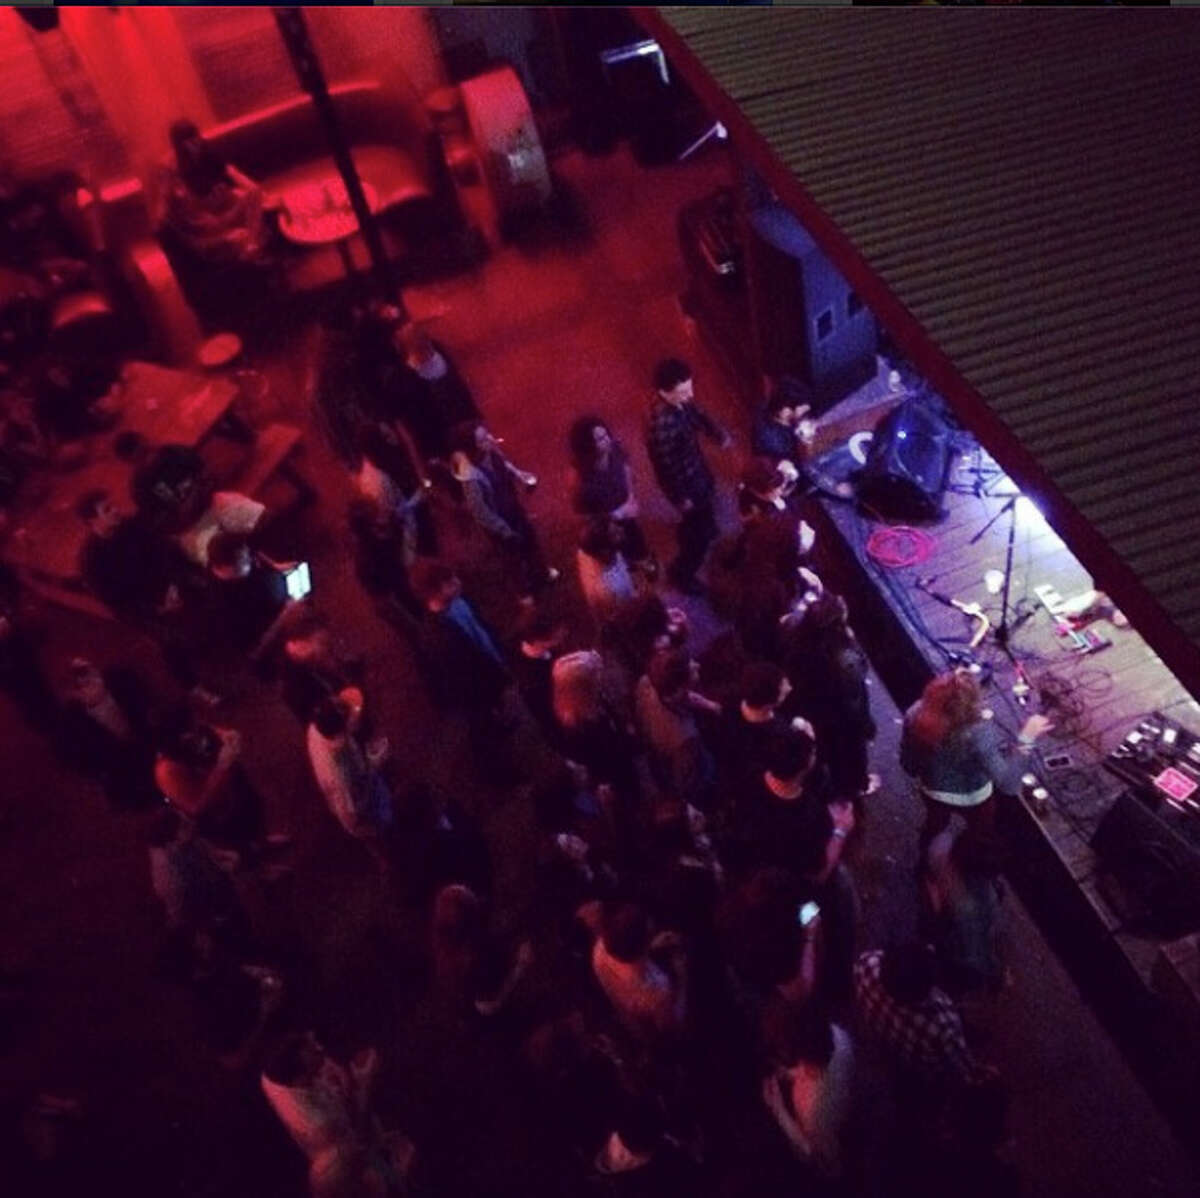 A gathering crowd for Beaumont rockers Jenny & the Reincarnation at Tequila Rok. Photo from @thecatfive on Instagram